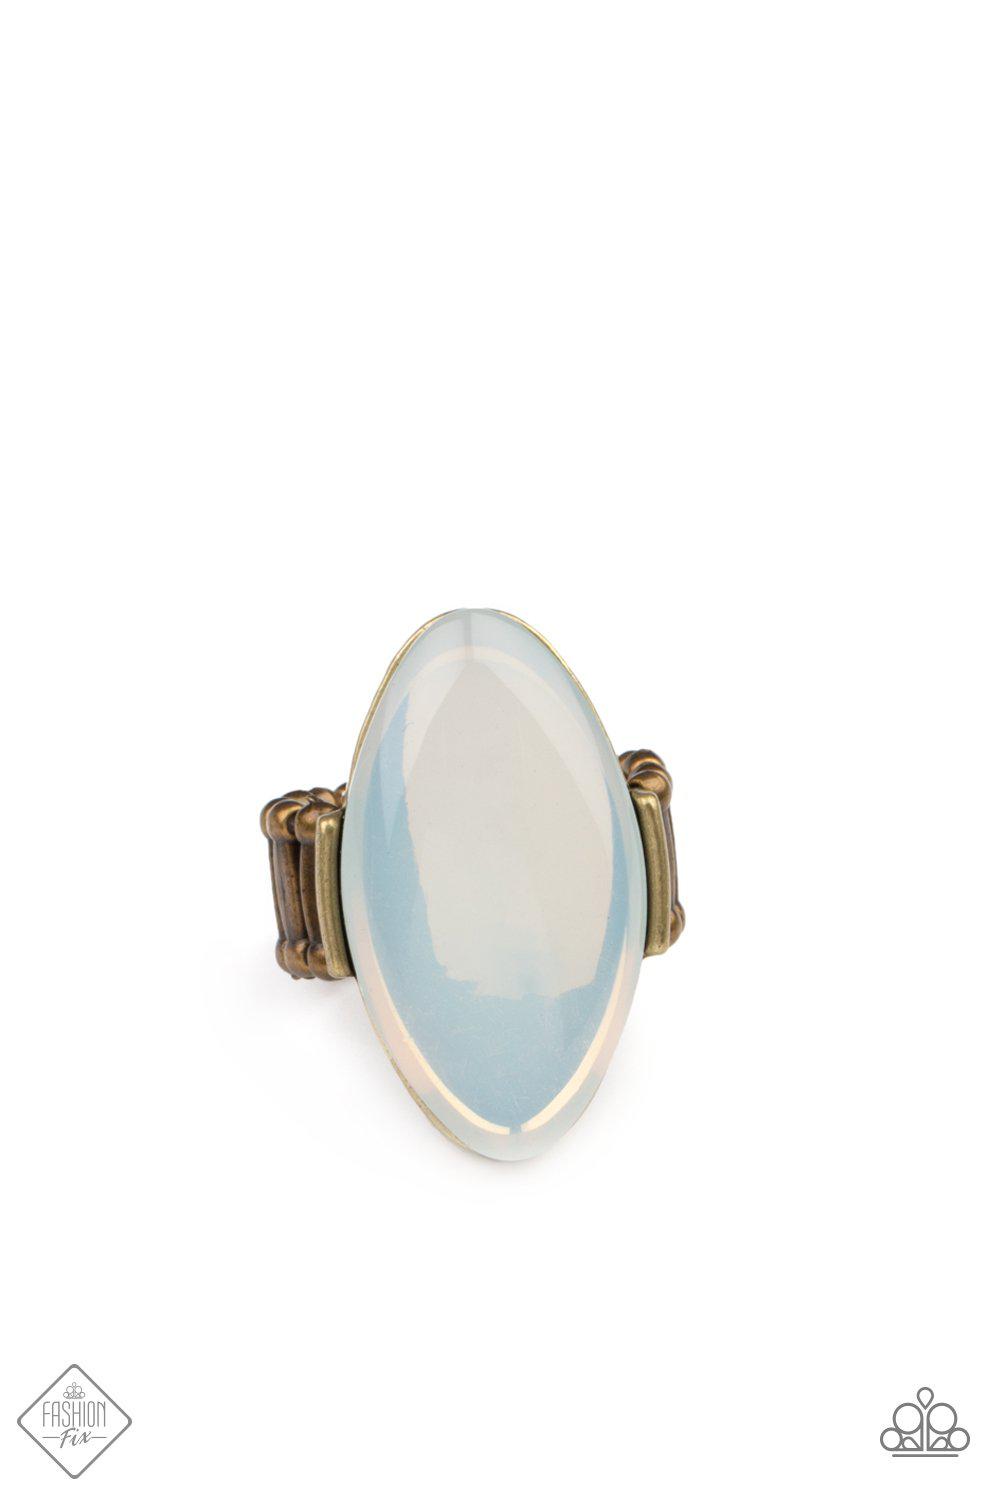 Opal Odyssey Brass and White Opal Ring - Paparazzi Accessories- lightbox - CarasShop.com - $5 Jewelry by Cara Jewels